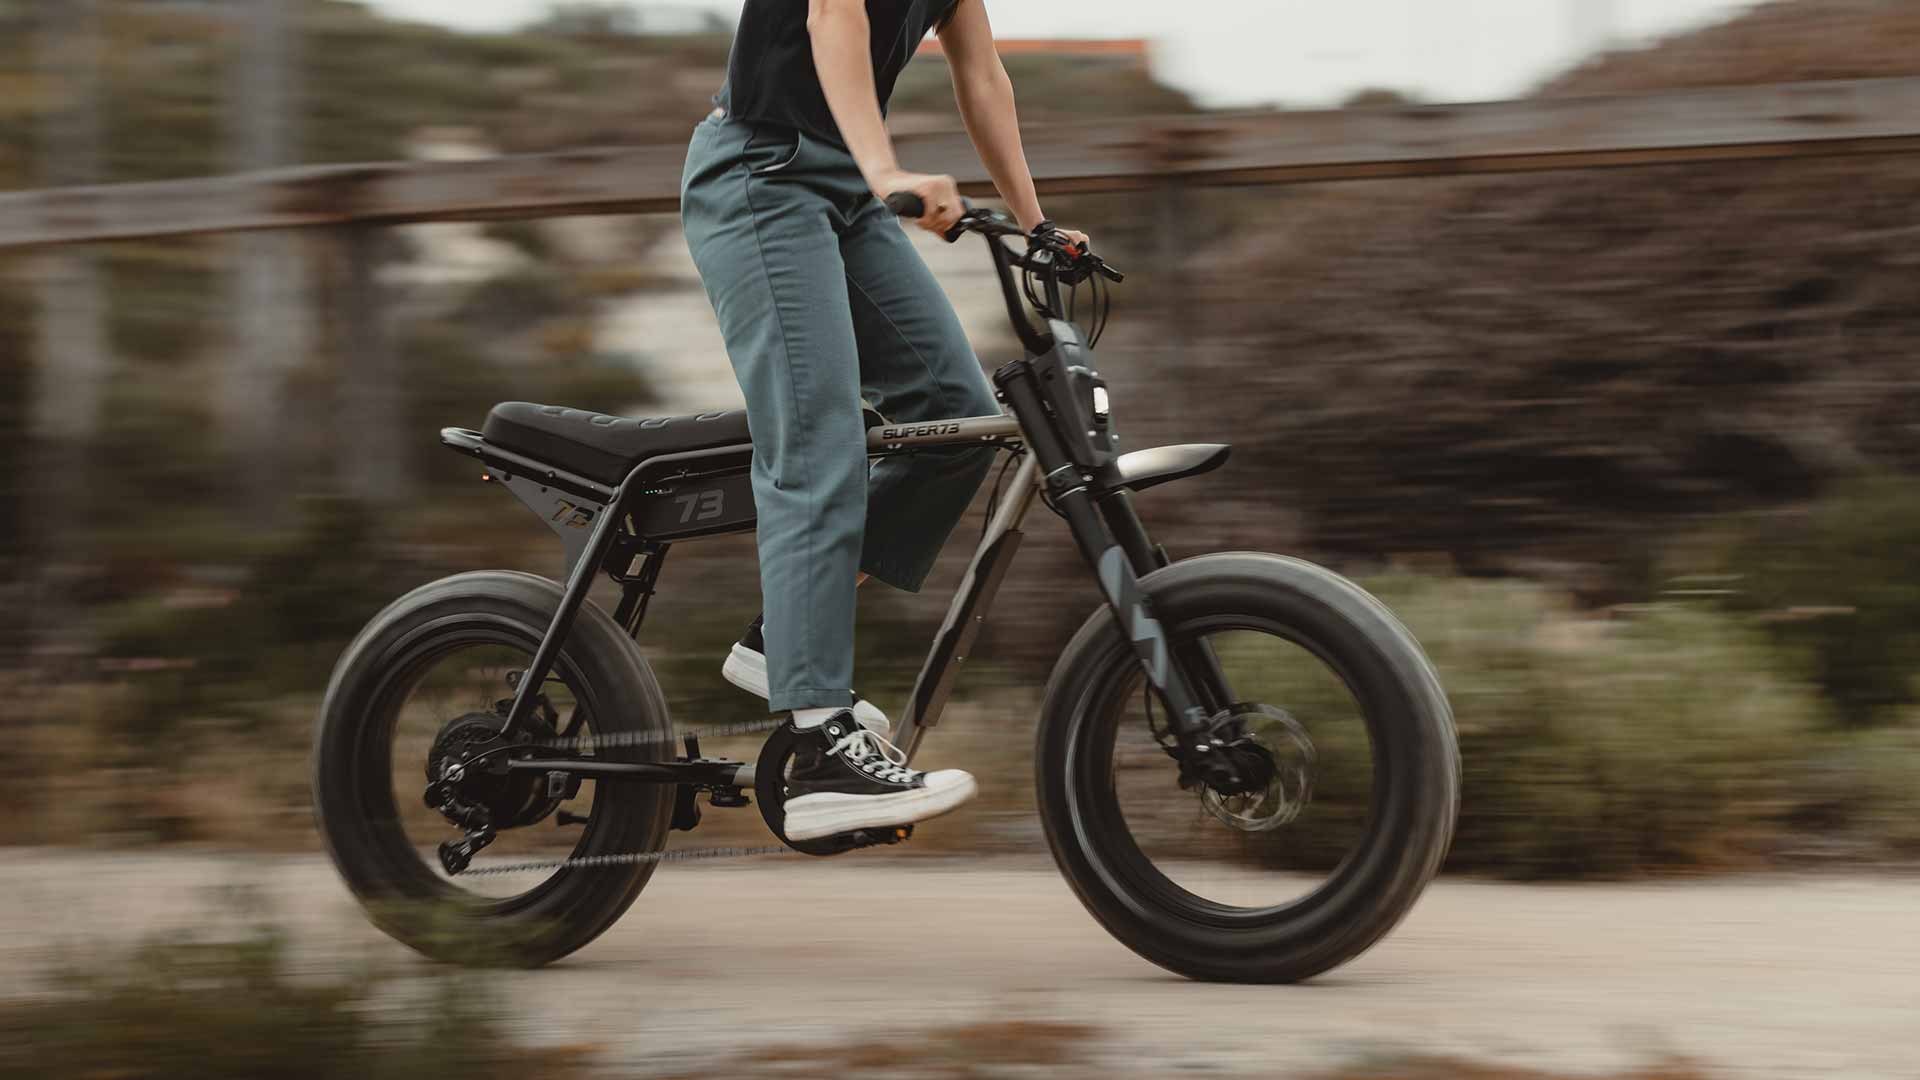 Rider on a Super73 Z Adventure ebike standing on the pedals hitting the throttle